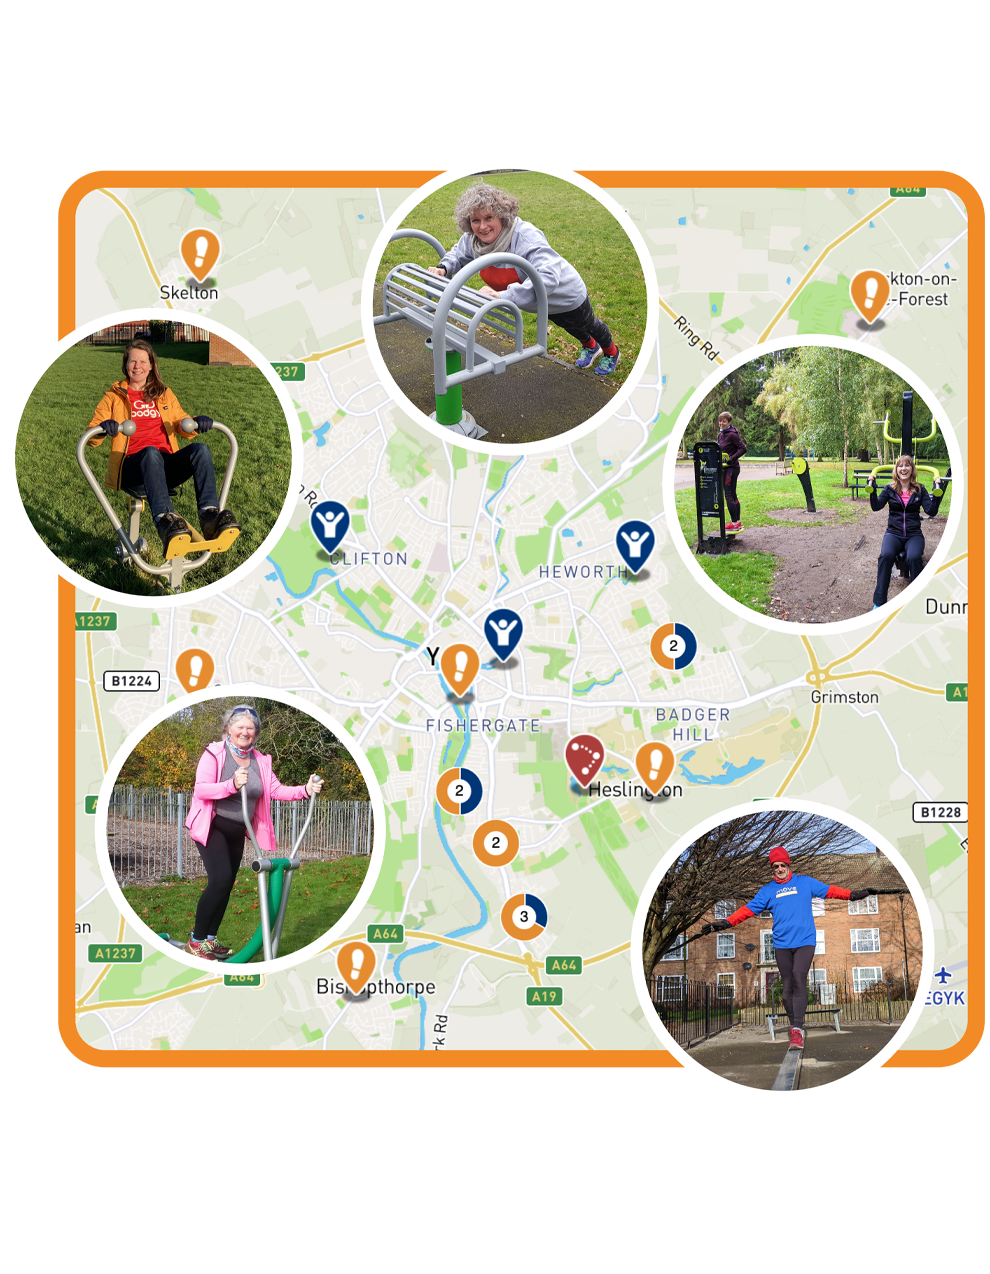 Graphic of Move Map in York area, highlighting outdoor gyms, trim trails and walks